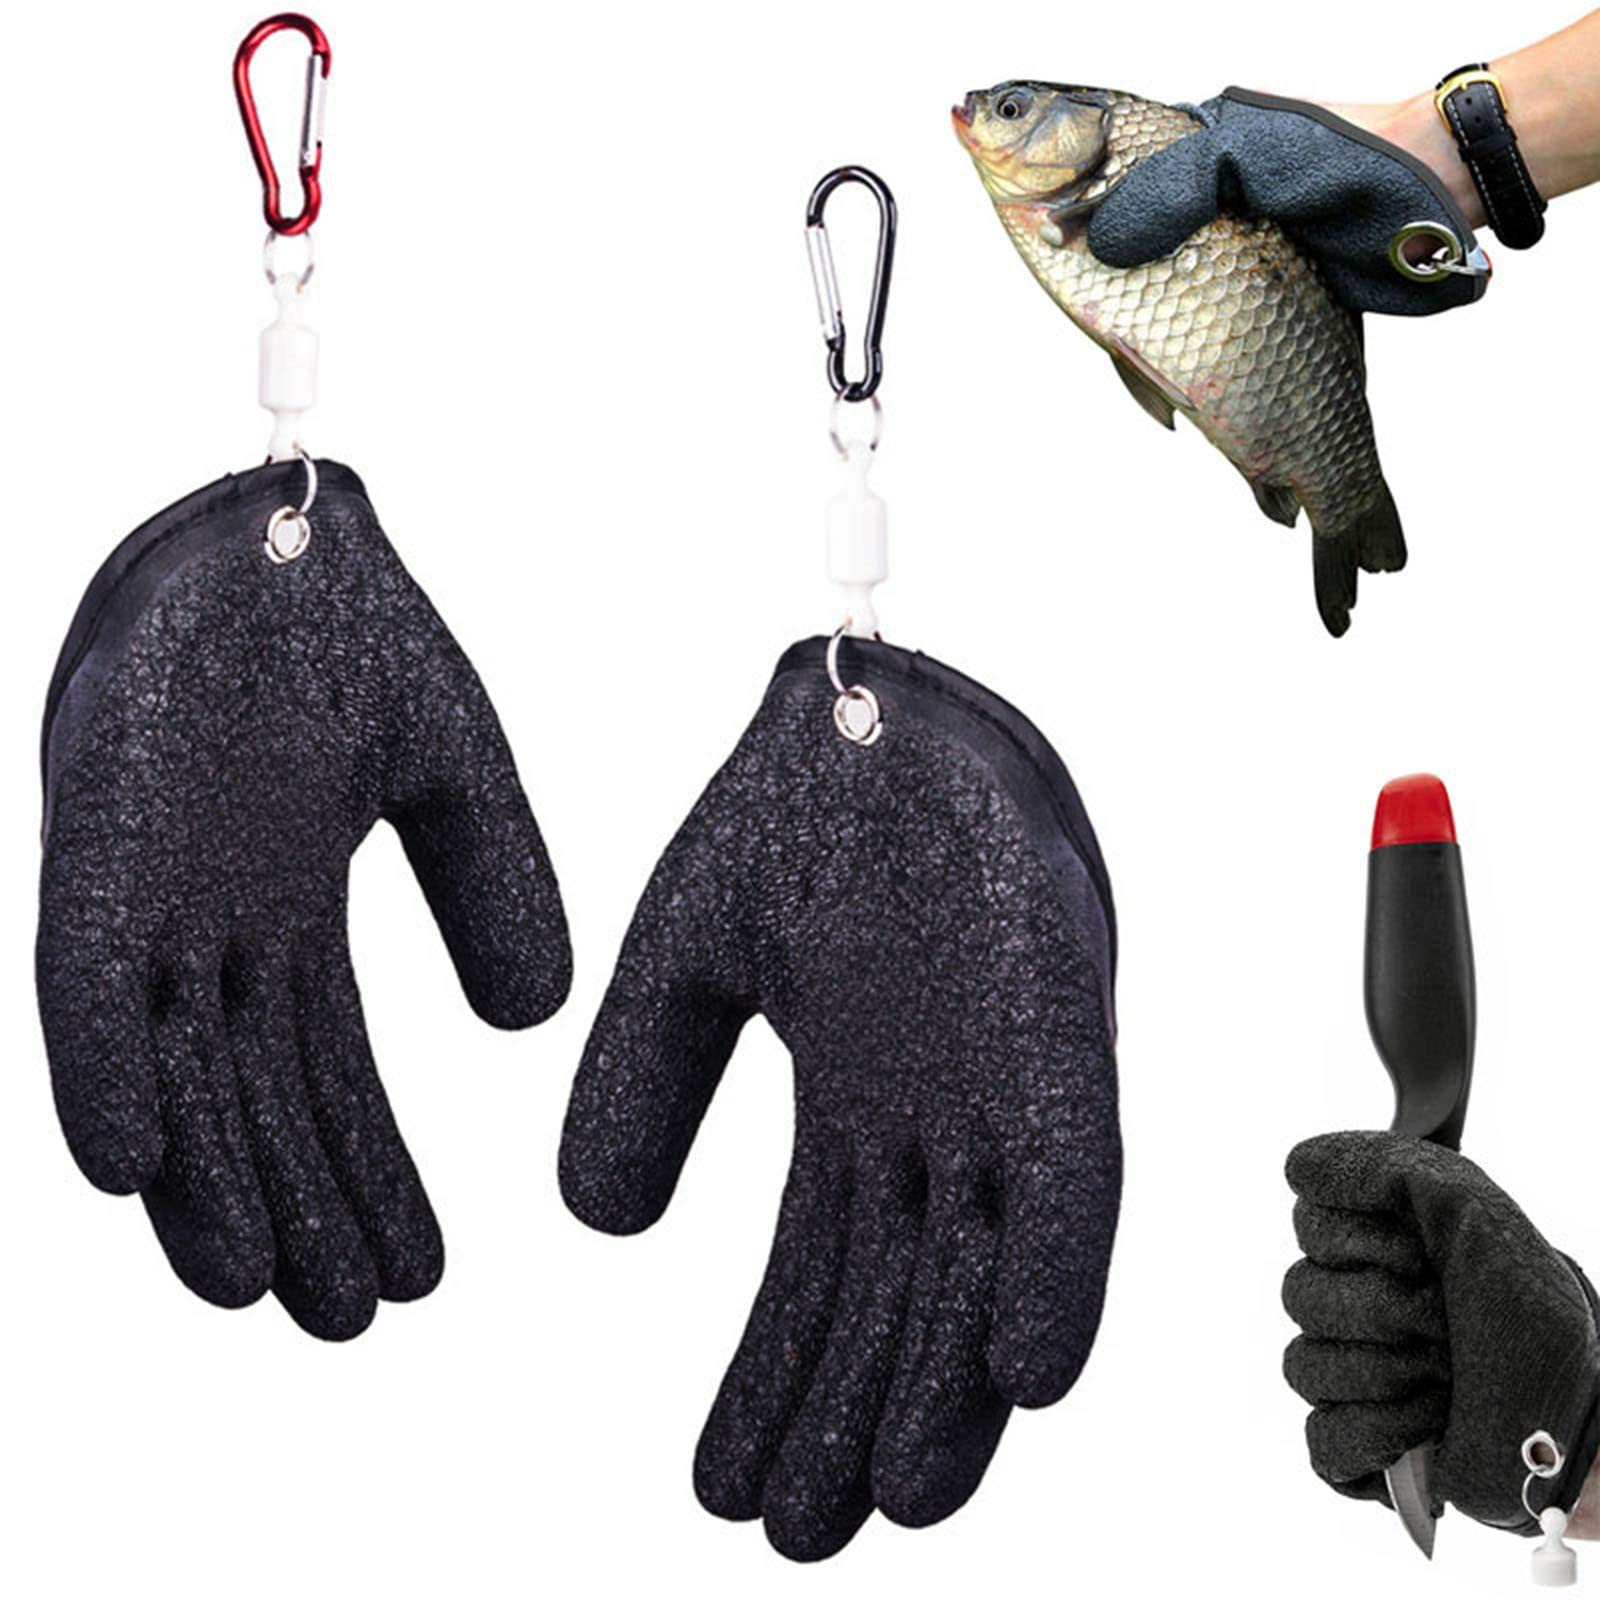 Thickened Fishing Gloves Waterproof Puncture-Resistant Fish Catching Gloves  with Magnet Hook - Right Hand Wholesale